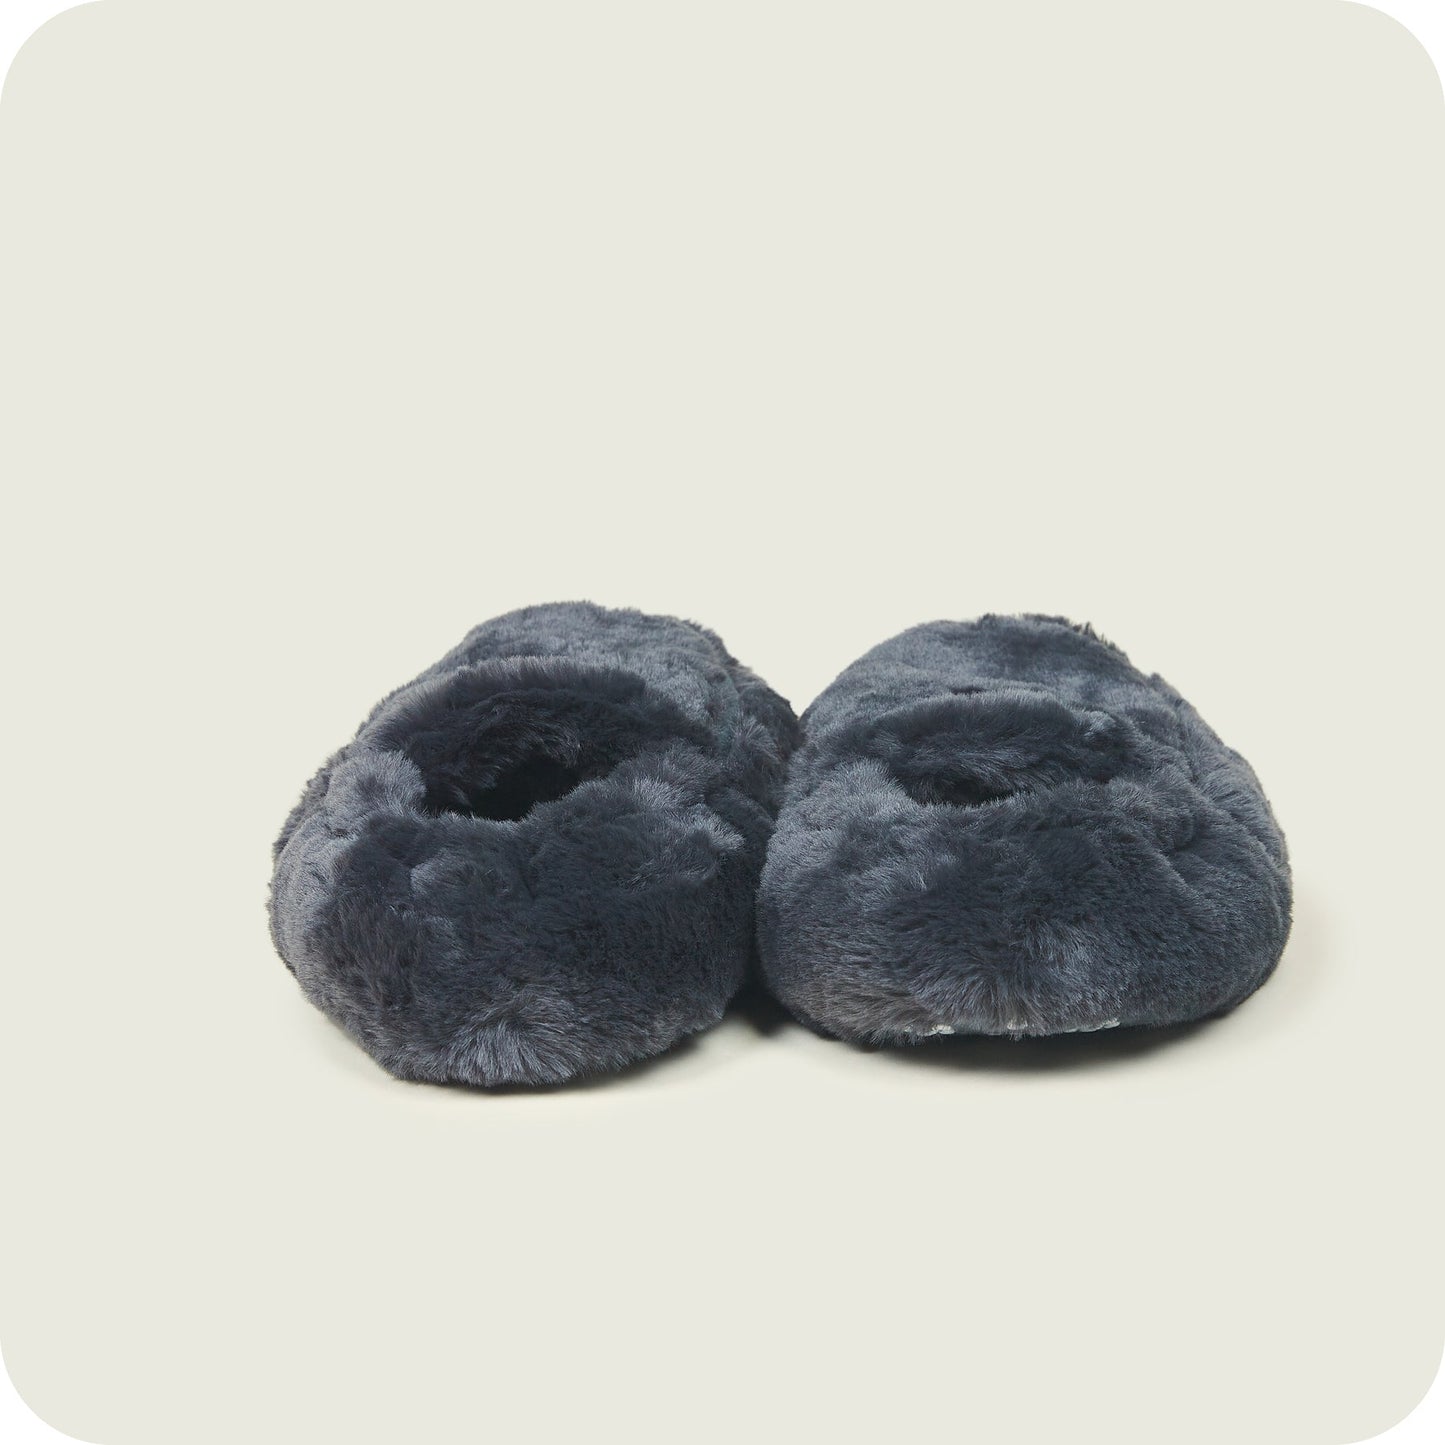 Warmies Luxury Slippers in Box - Charcoal